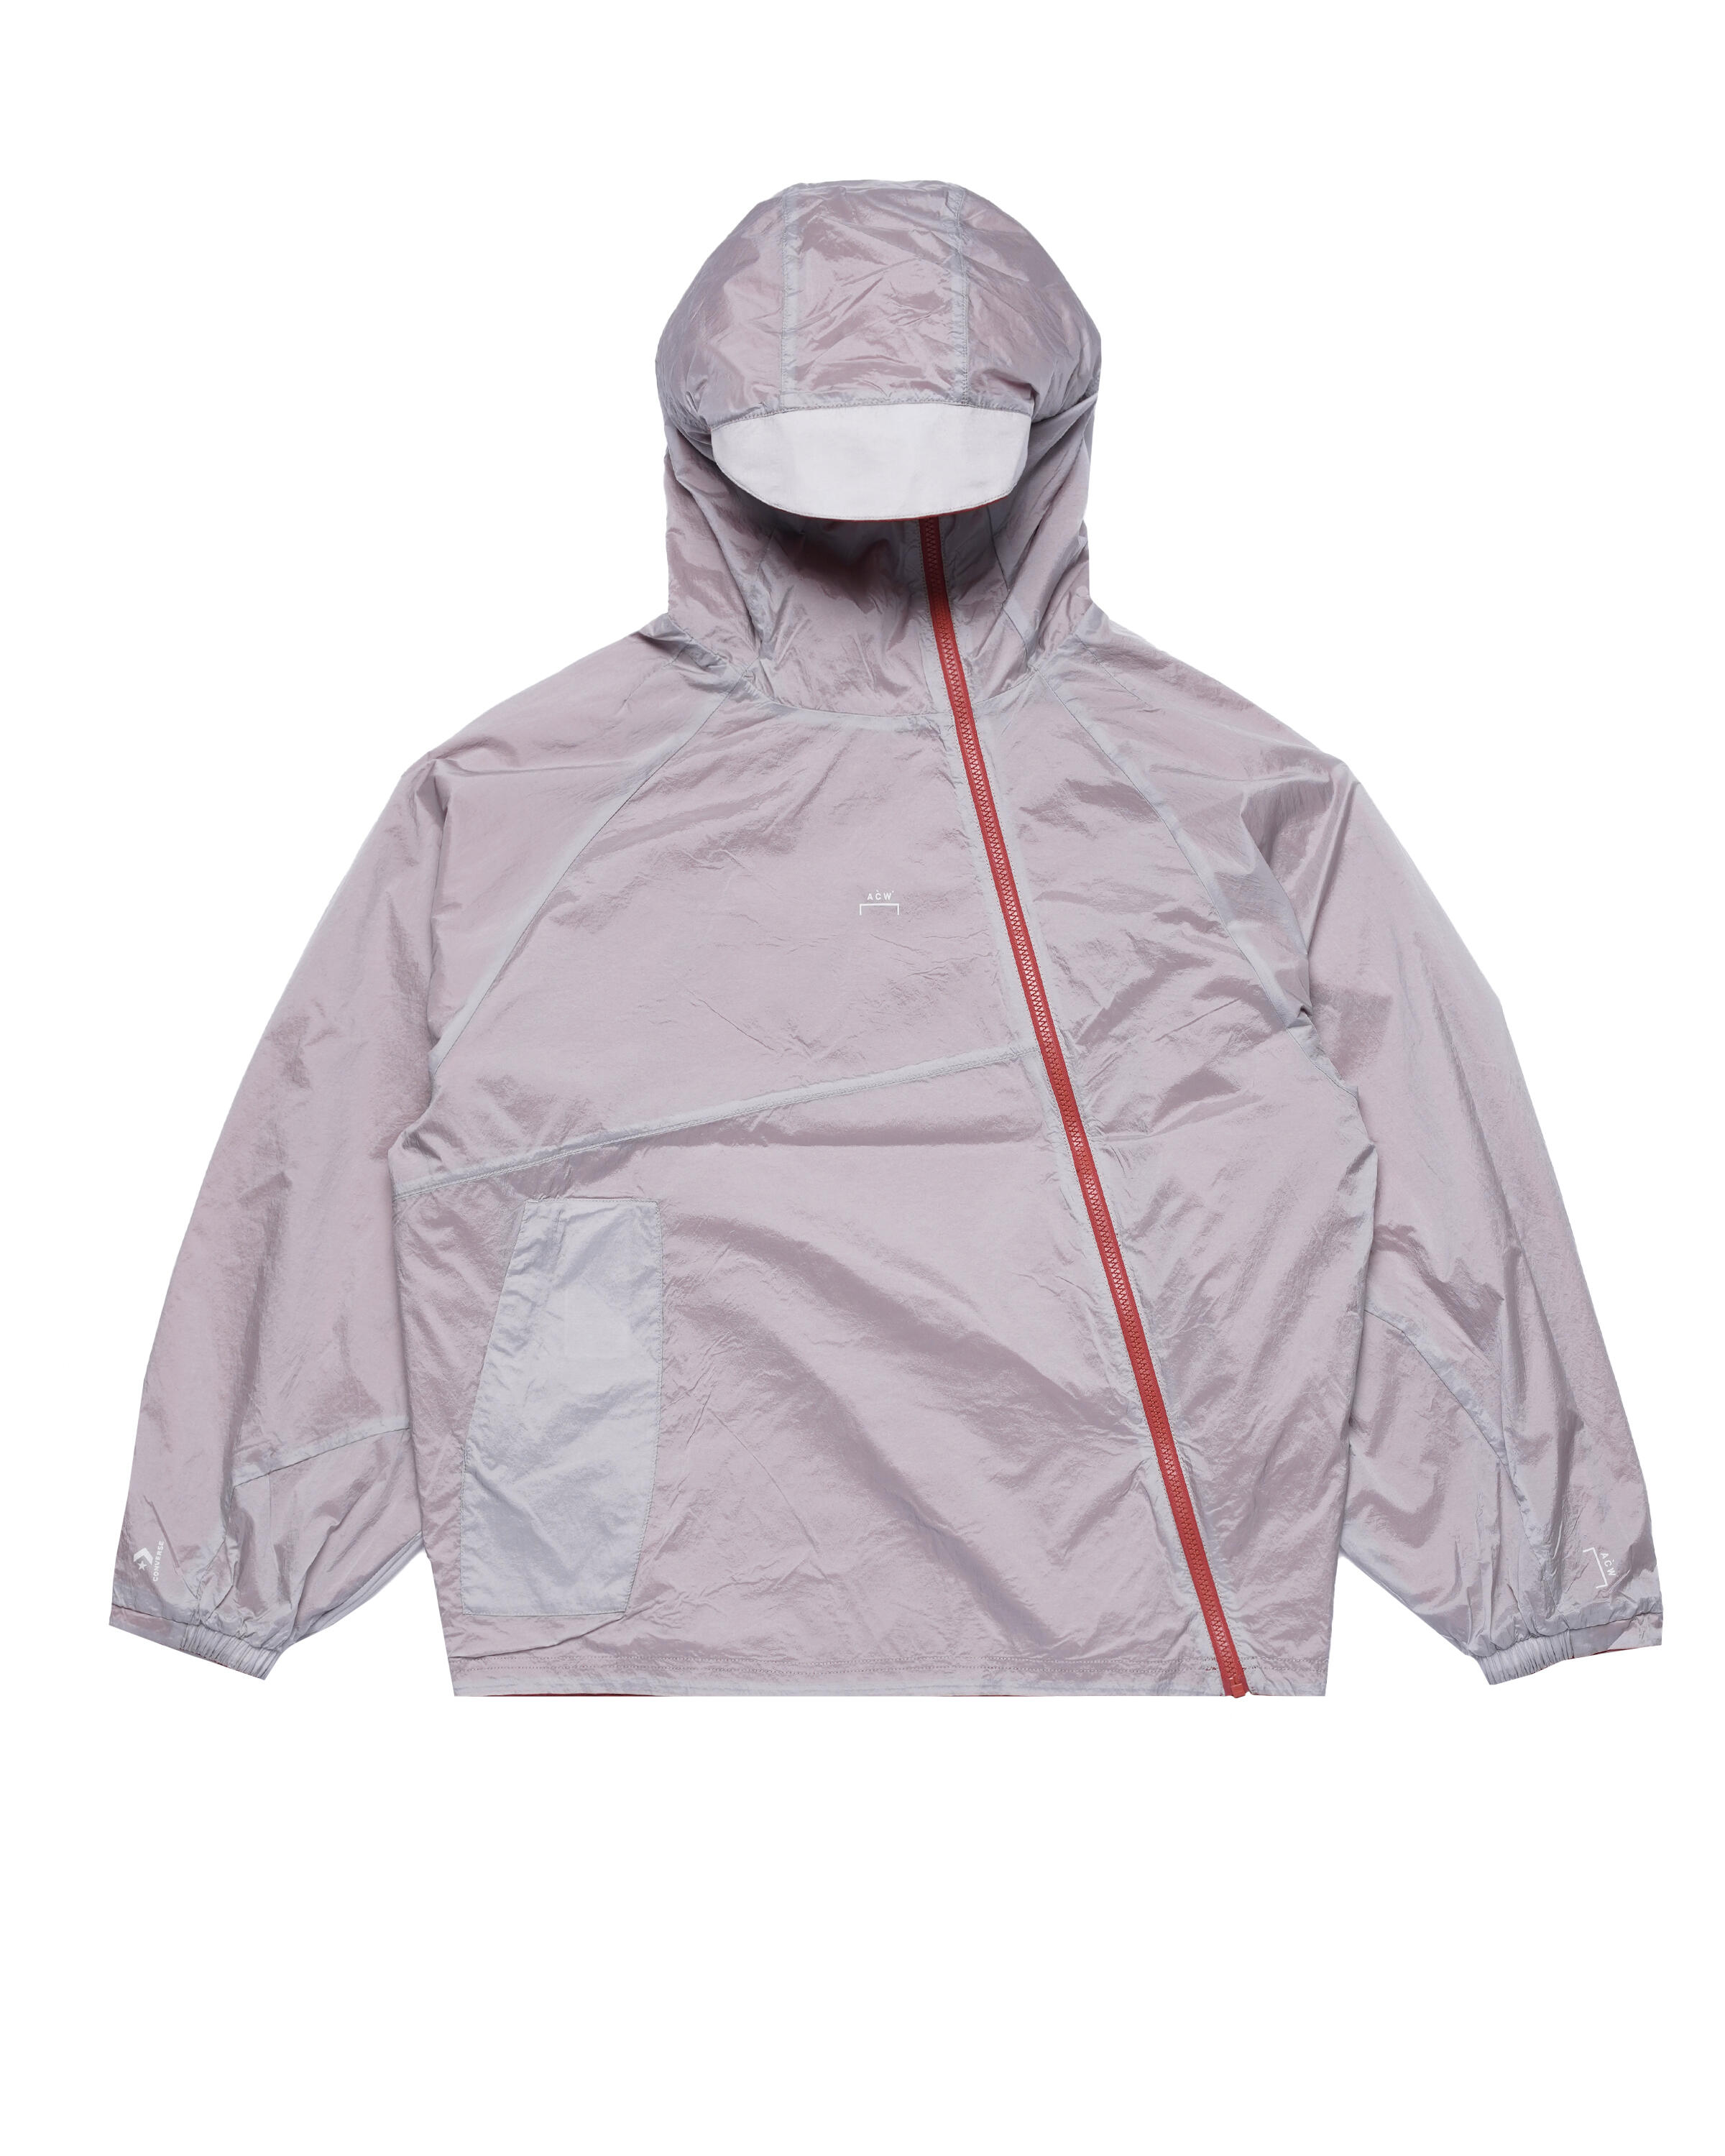 Converse x A-COLD-WALL*  Reversible WIND JACKET